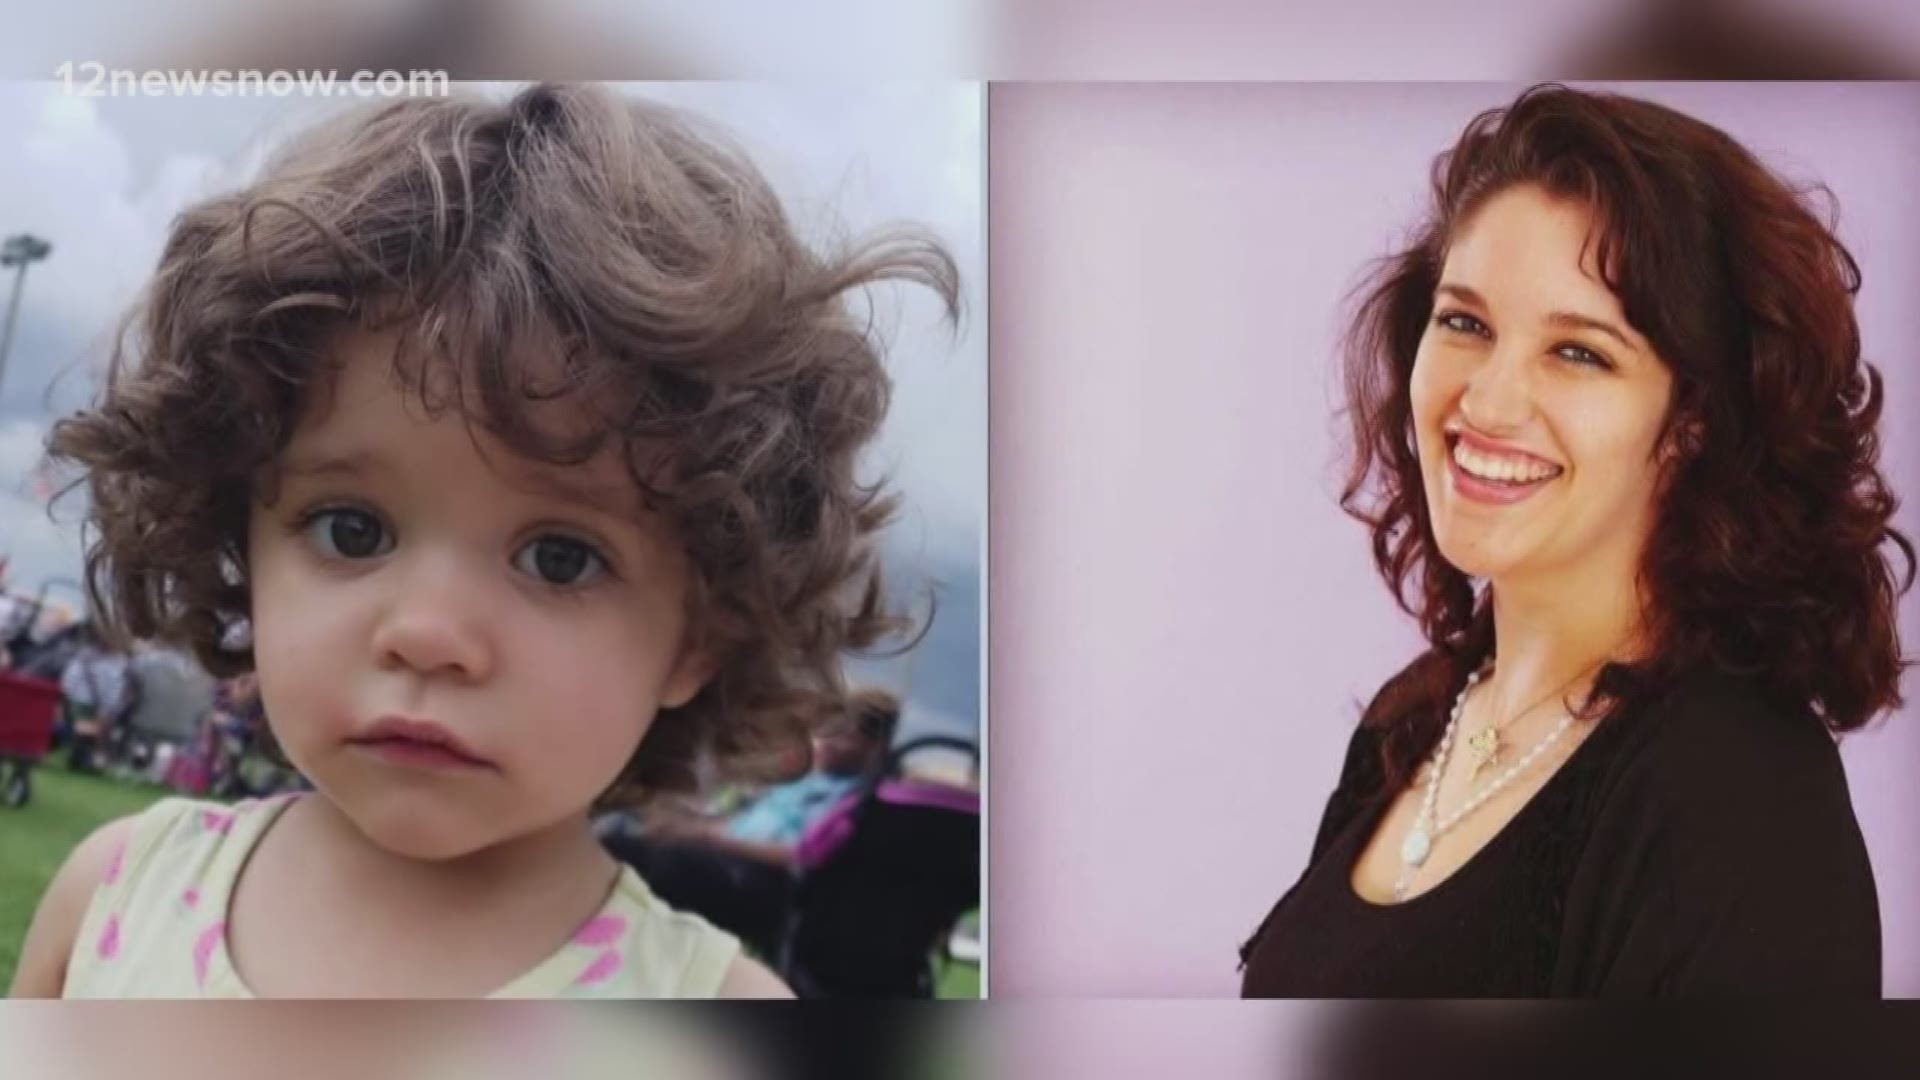 The relatives of two-year-old, Savannah Roque, are campaigning to bring her body back to Florida to be buried next to her mother after she was brutally murdered by her father.